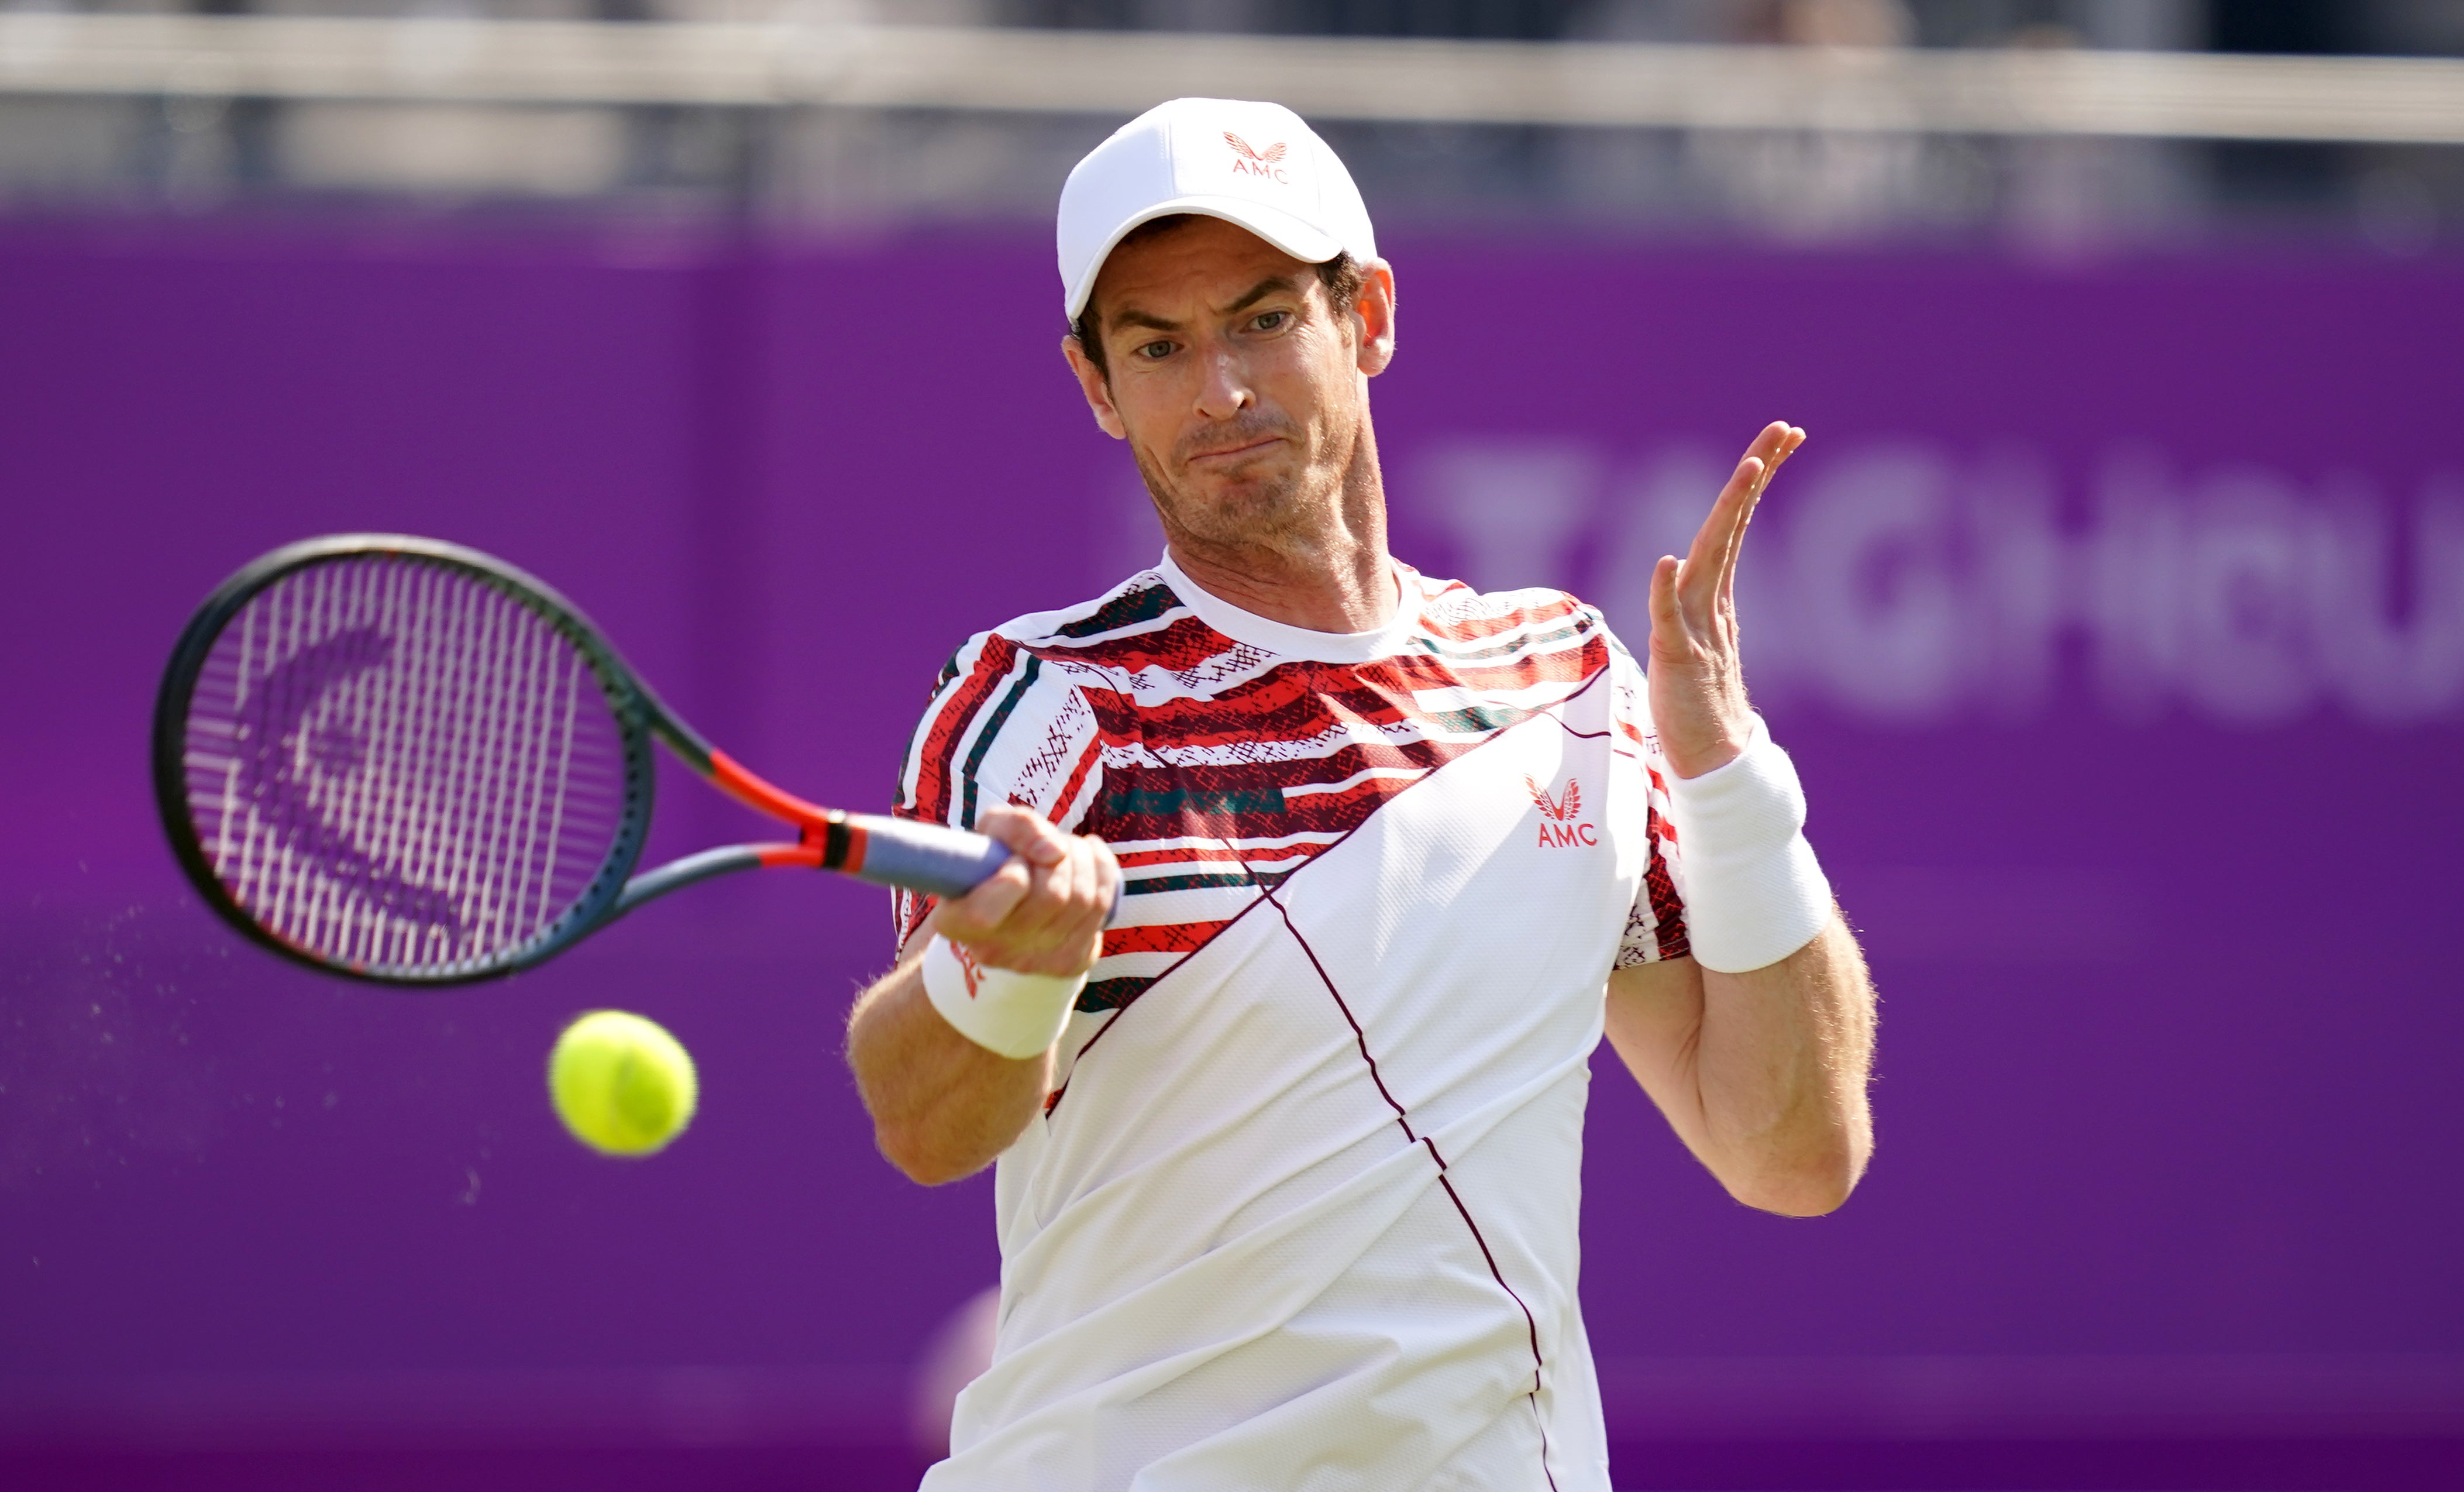 Andy Murray warmed up for Wimbledon by reaching the second round at Queen's Club